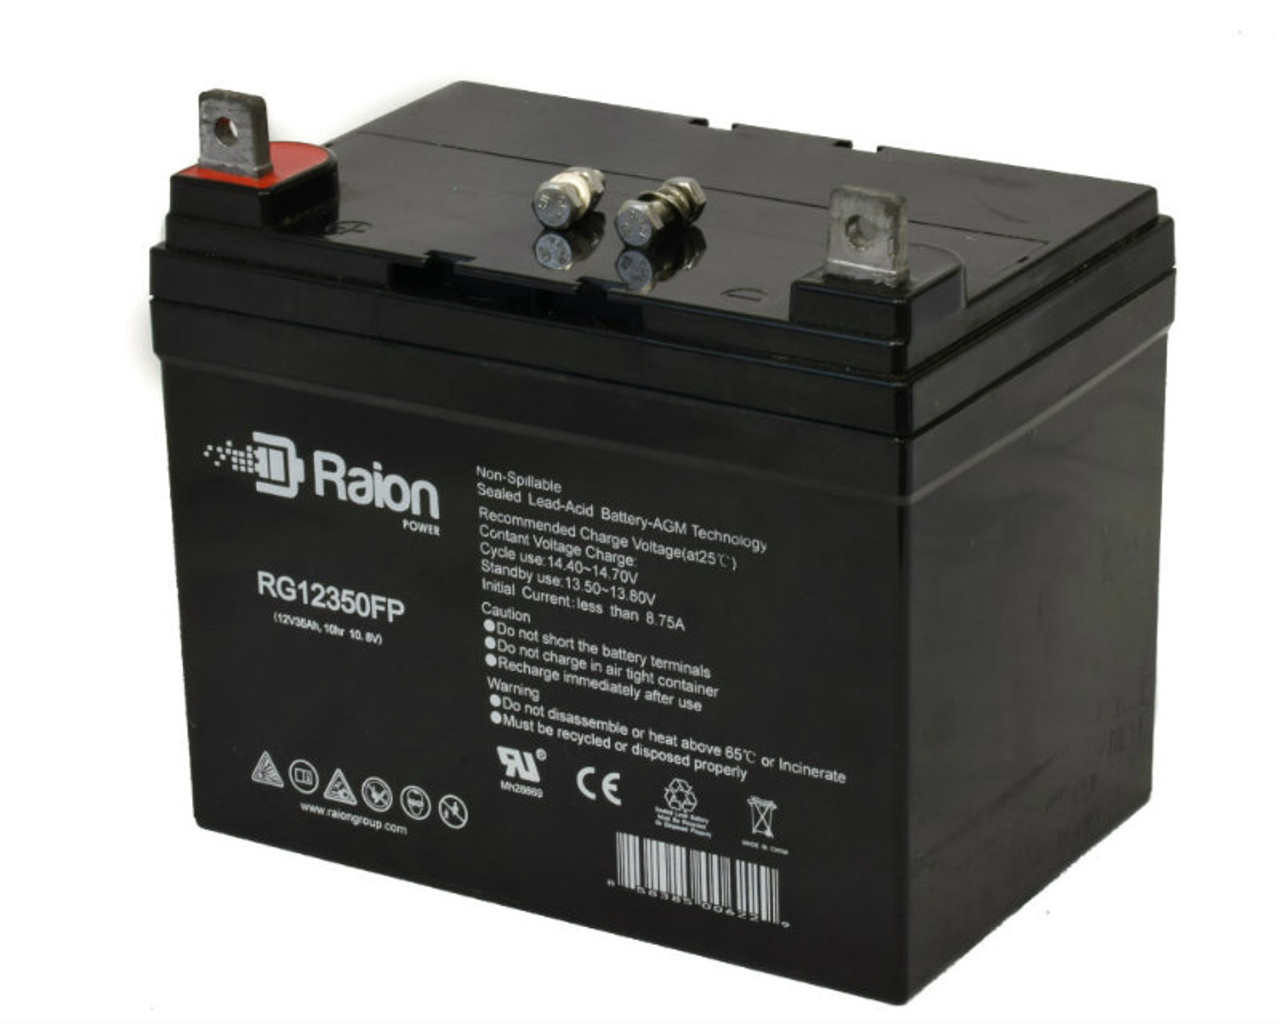 Raion Power Replacement 12V 35Ah RG12350FP Mobility Scooter Battery for Invacare Runabout